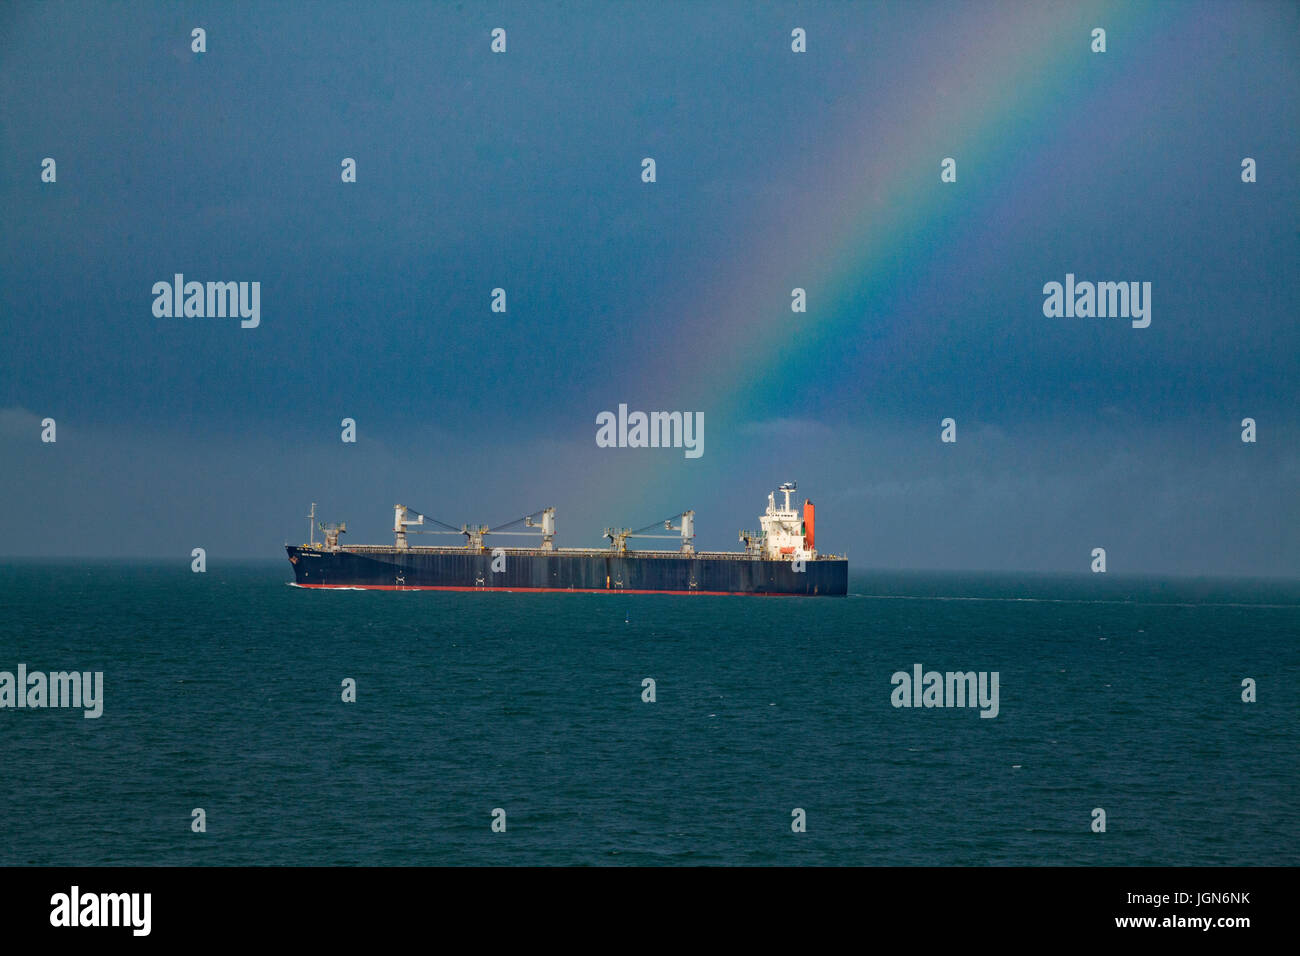 Freighter sailing across the ocean with a rainbow Touching the ship. Stock Photo